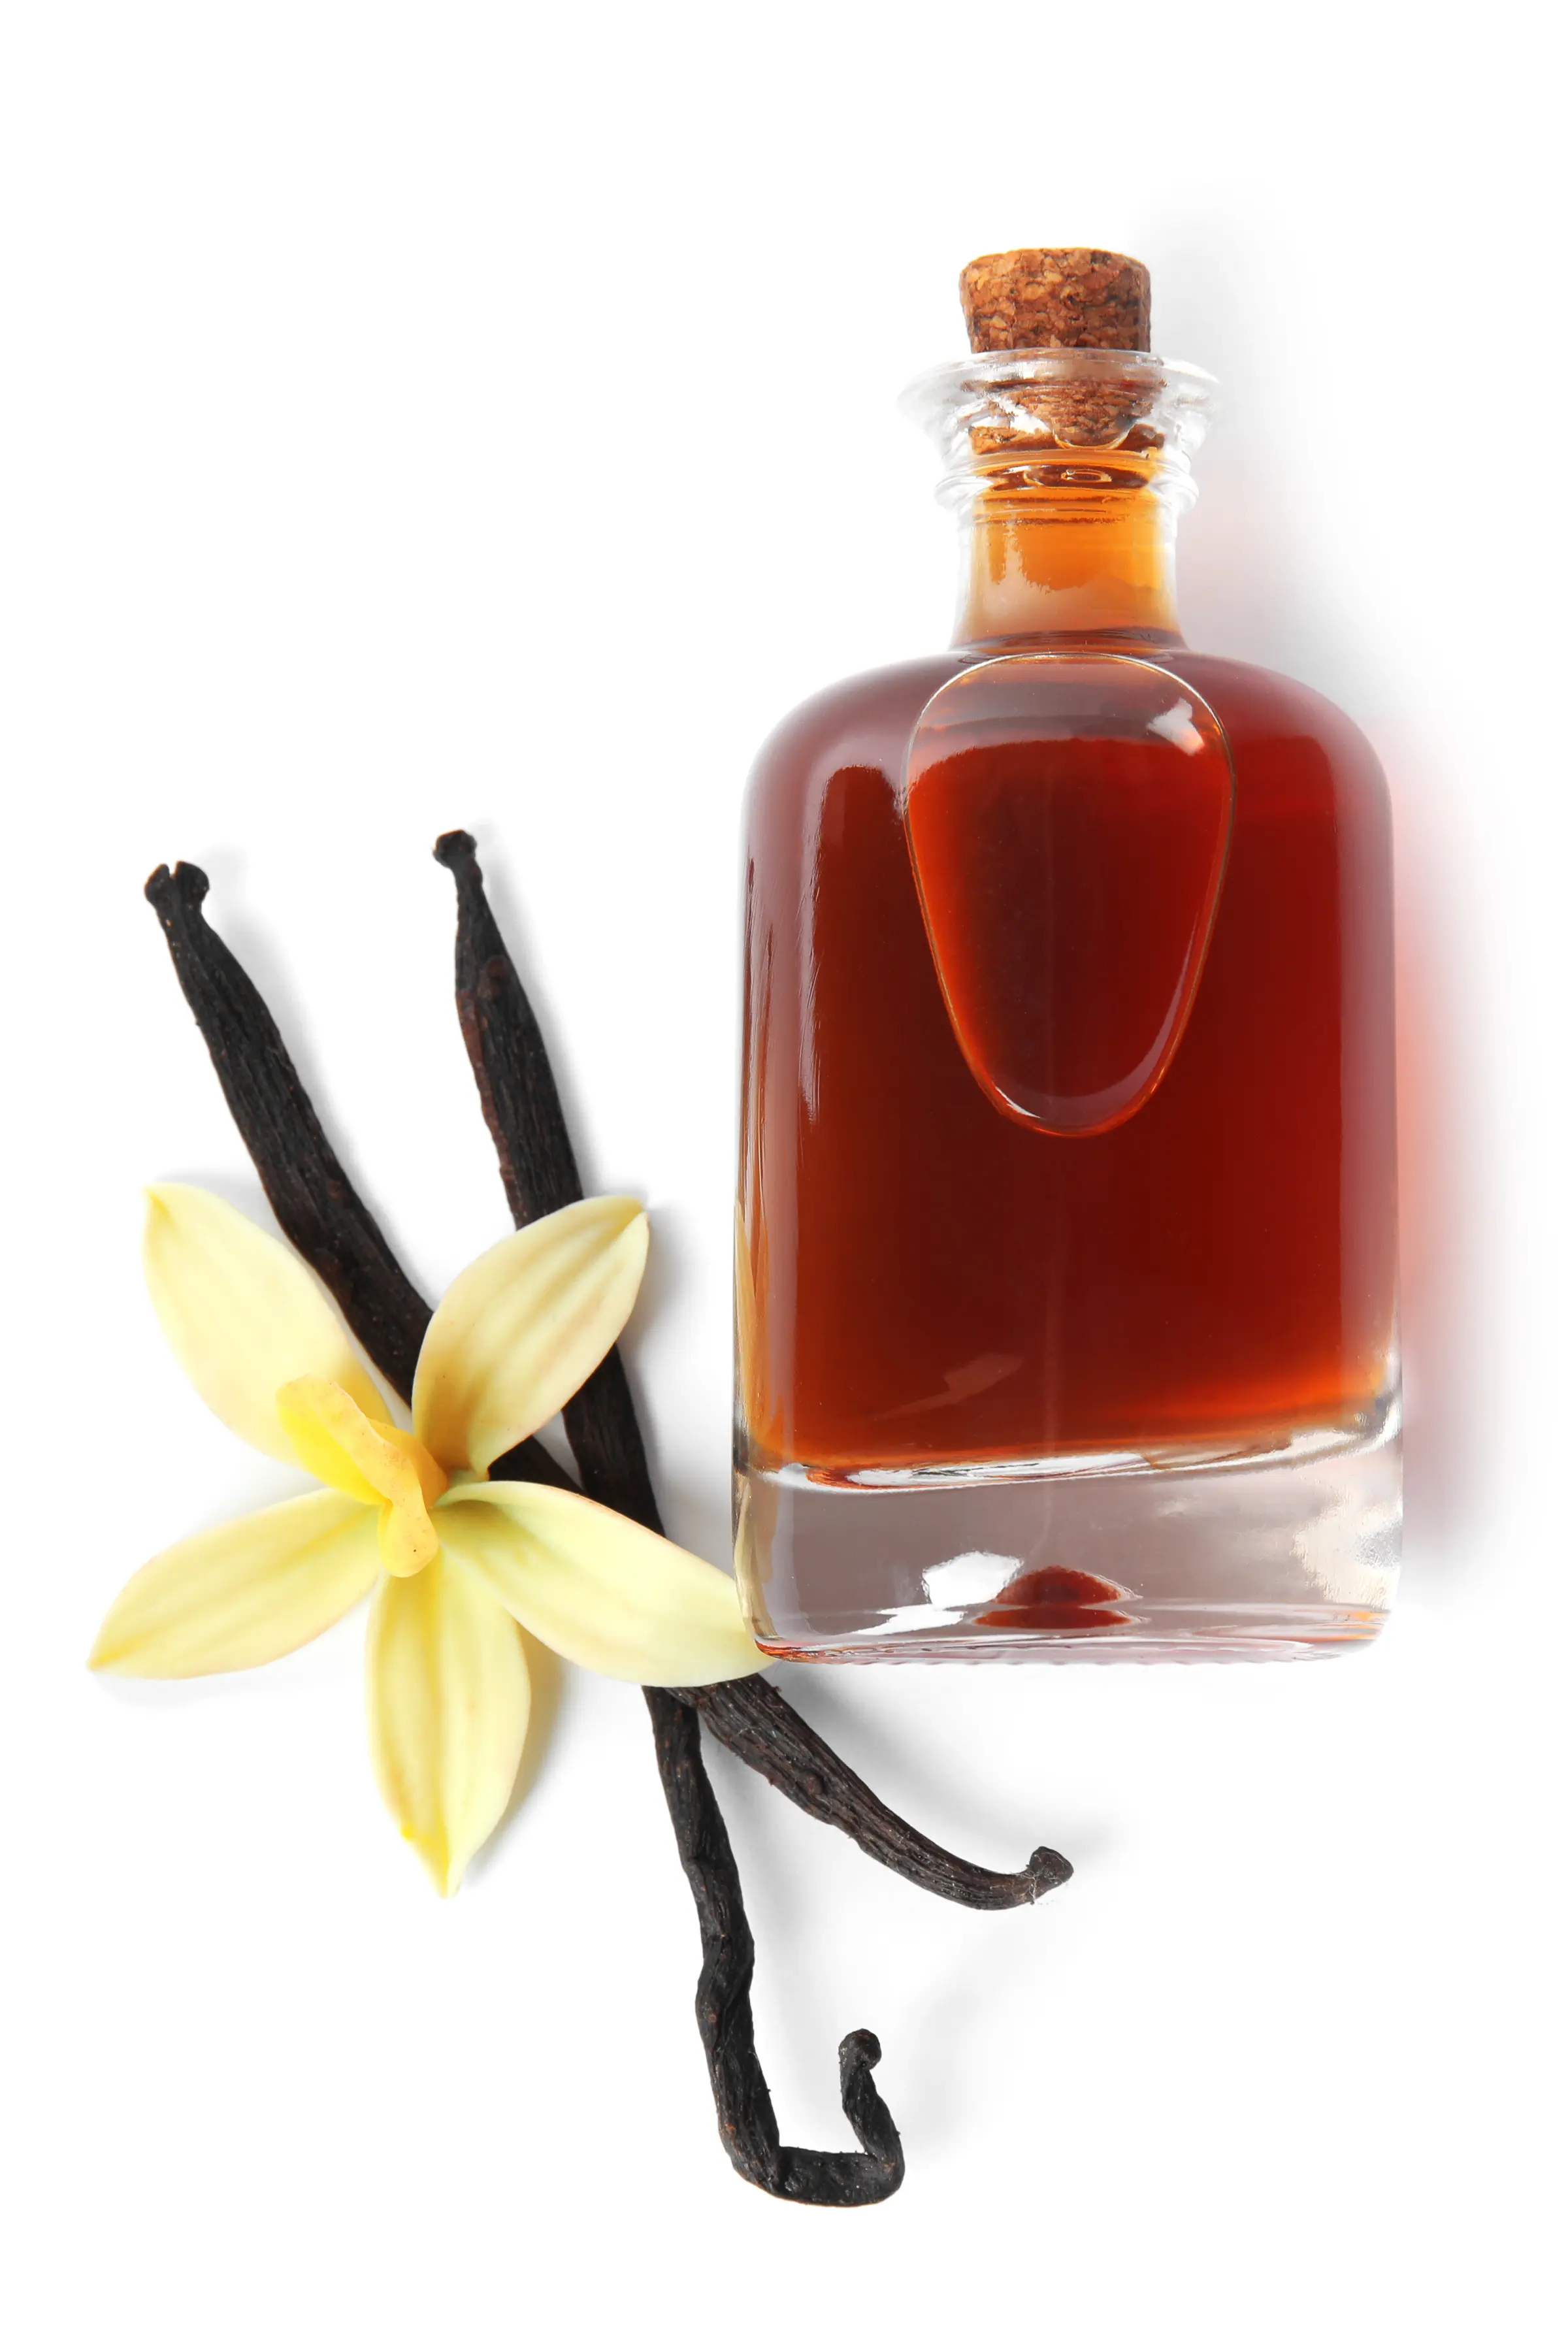 Vanilla beans and flower next to a small bottle of vanilla with a cork stopper.